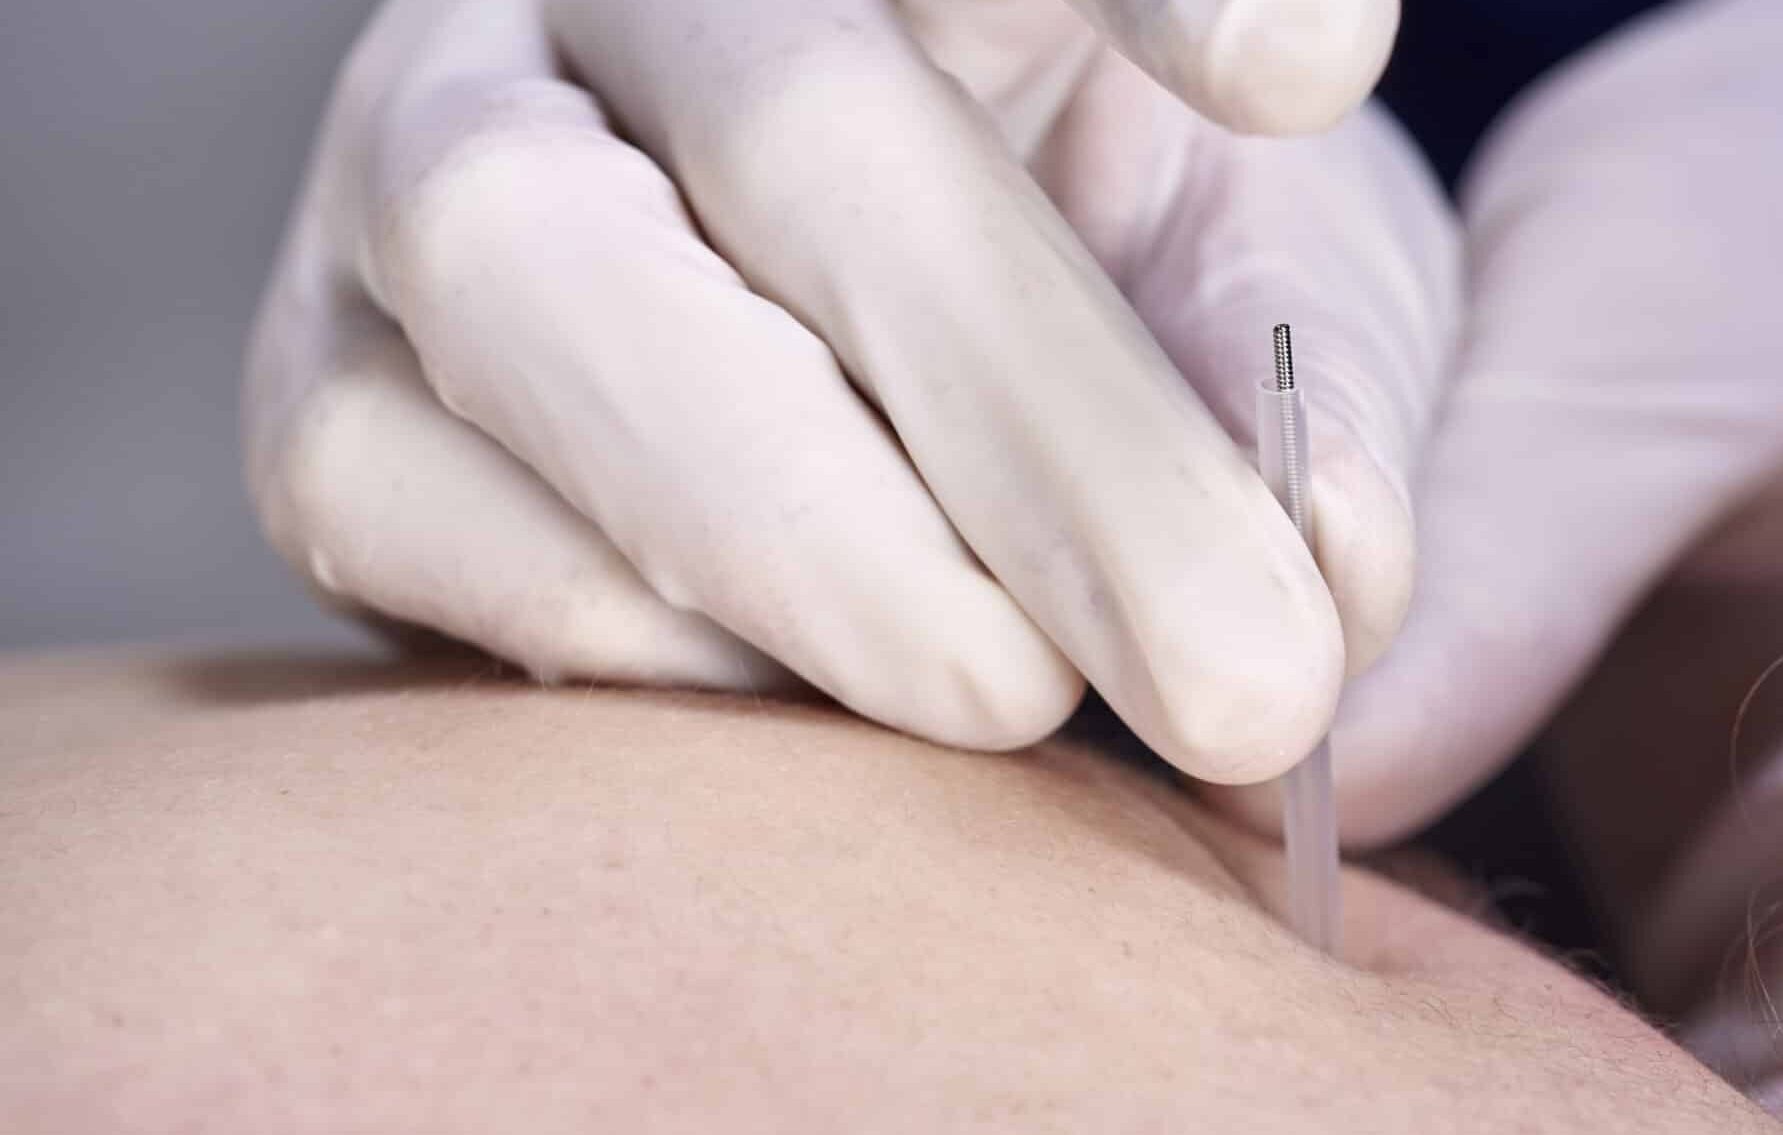 chiropractor doing dry needling, closeup of a needle and hands. physiotherapist, osteopath, manual therapy, acupressure. acupuncture, alternative medicine.